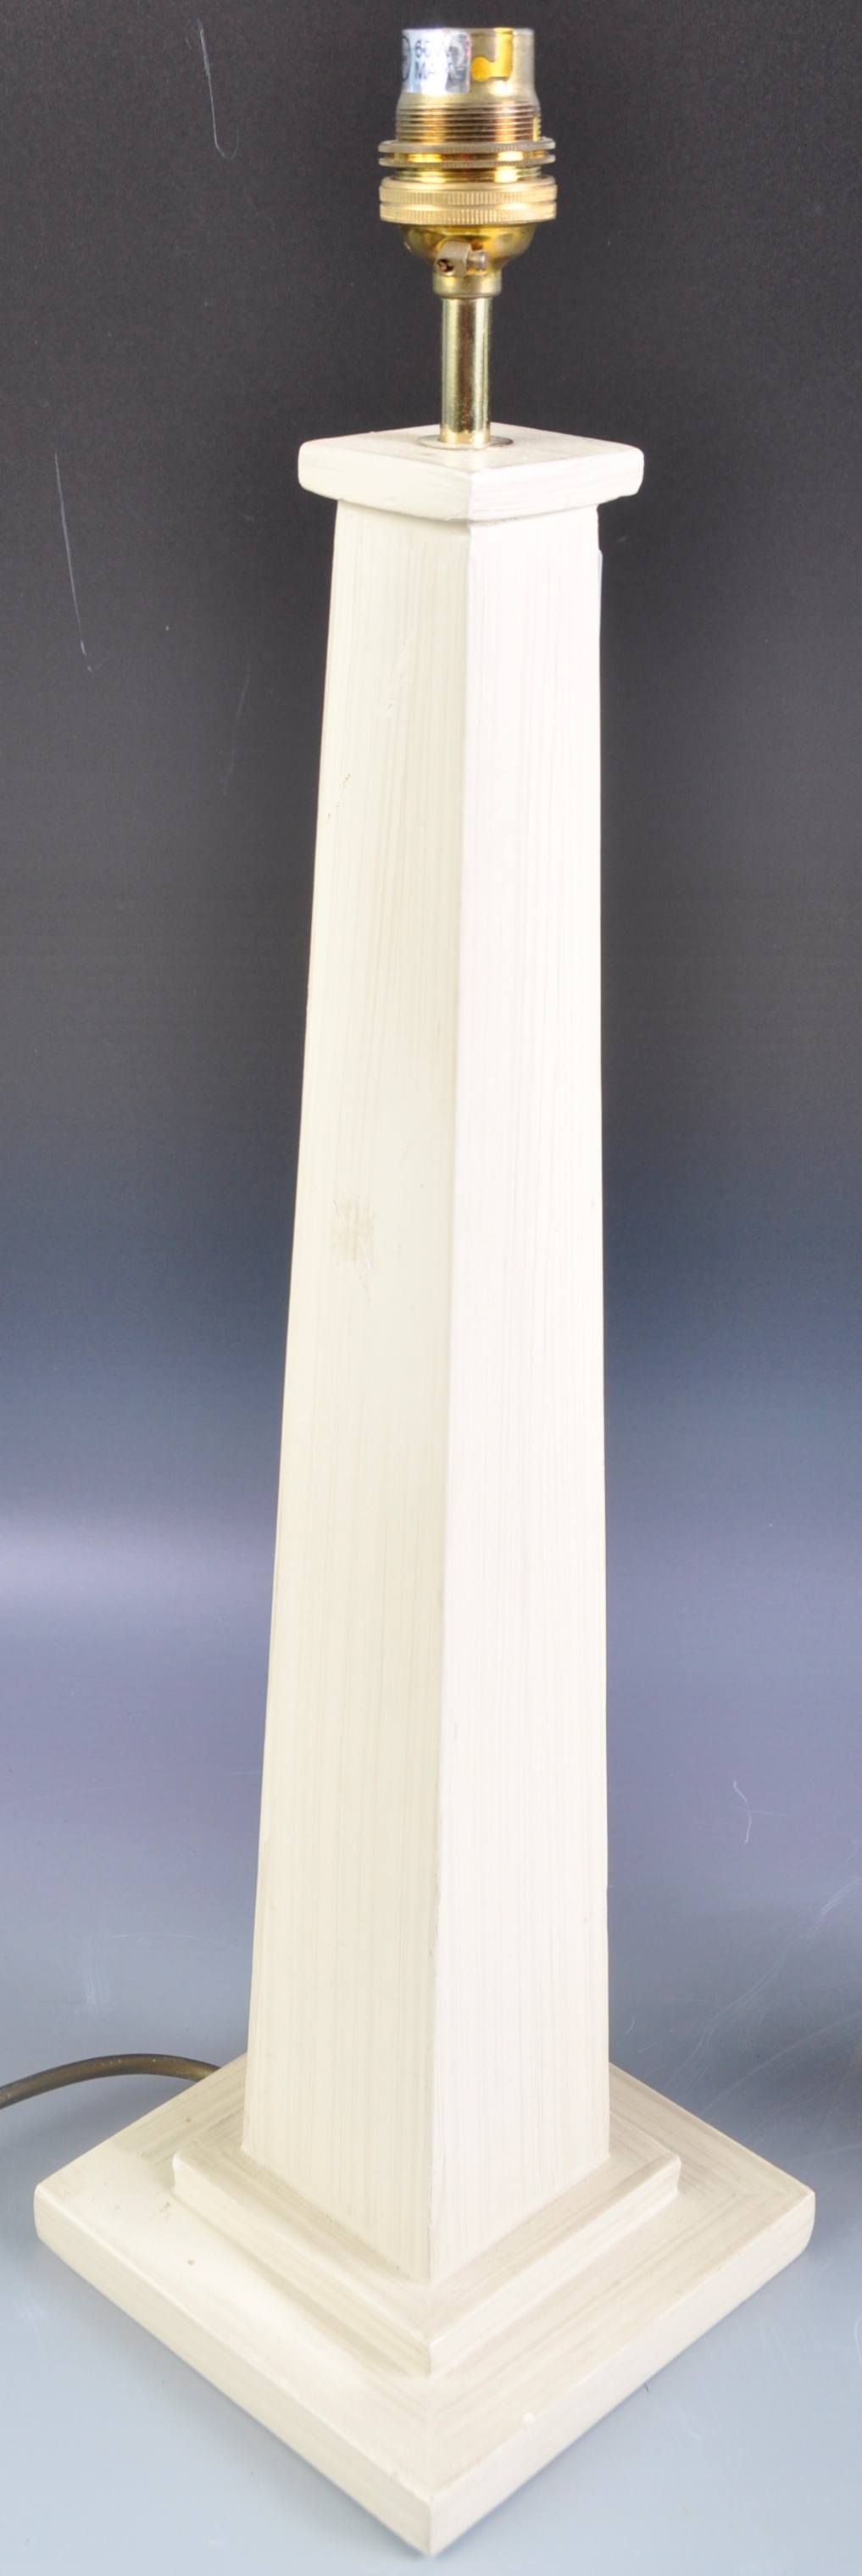 PAIR OF CONTEMPORARY TAPERING WOODEN COLUMN TABLE LAMPS - Image 4 of 7